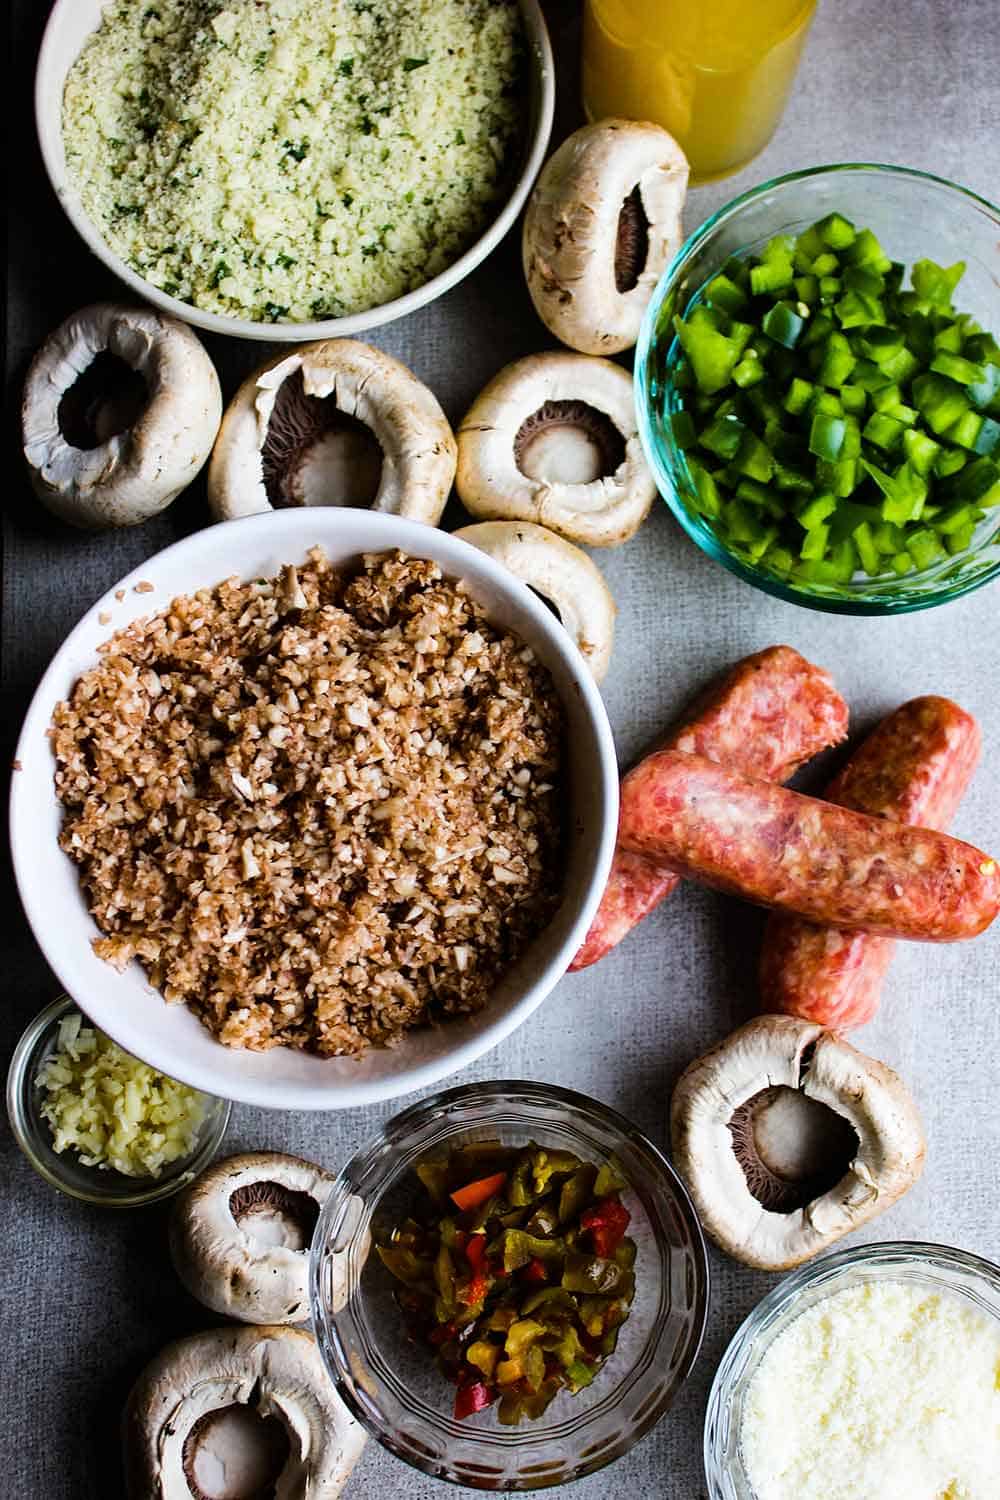 An overhead view of breadcrumbs, chopped mushrooms, links of sausage, and other ingredients for stuffed mushrooms